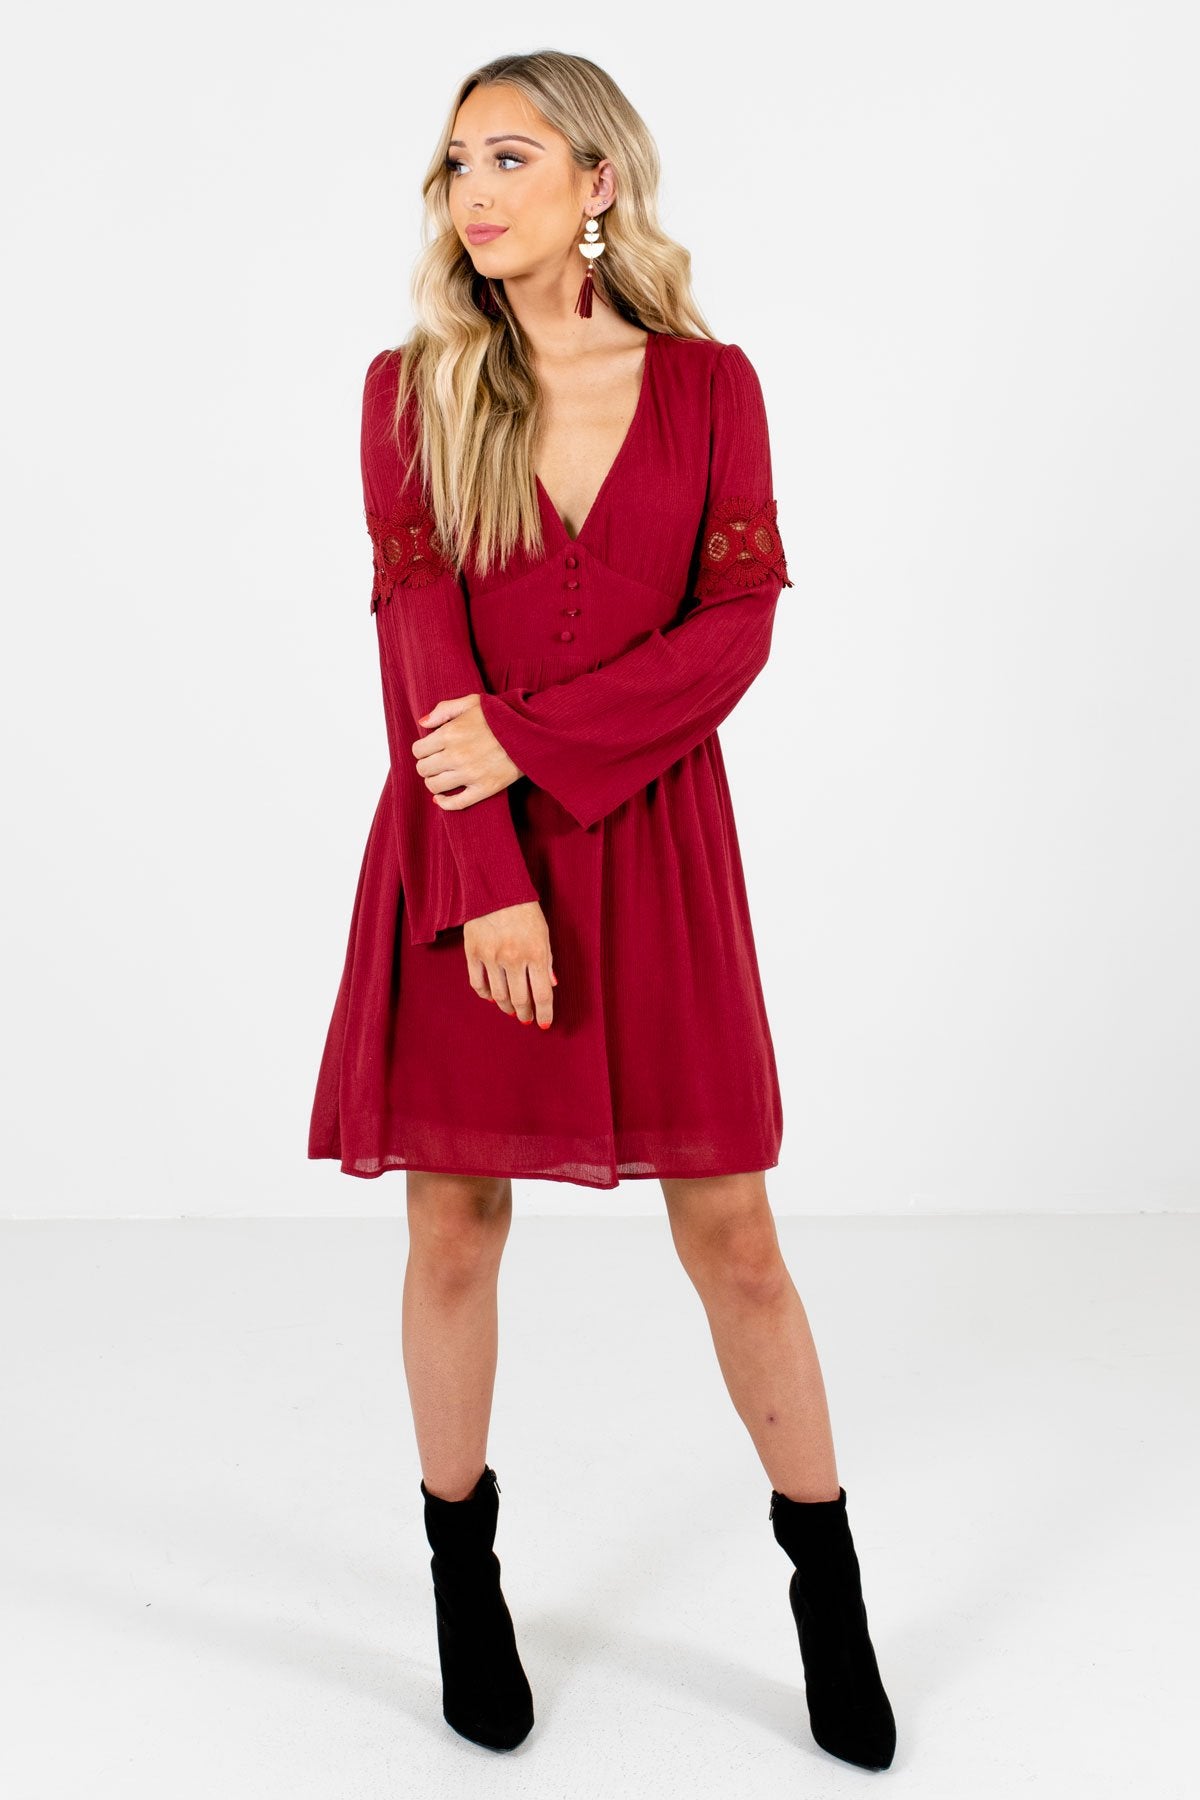 Women’s Rust Red Partially Lined Boutique Mini Dress